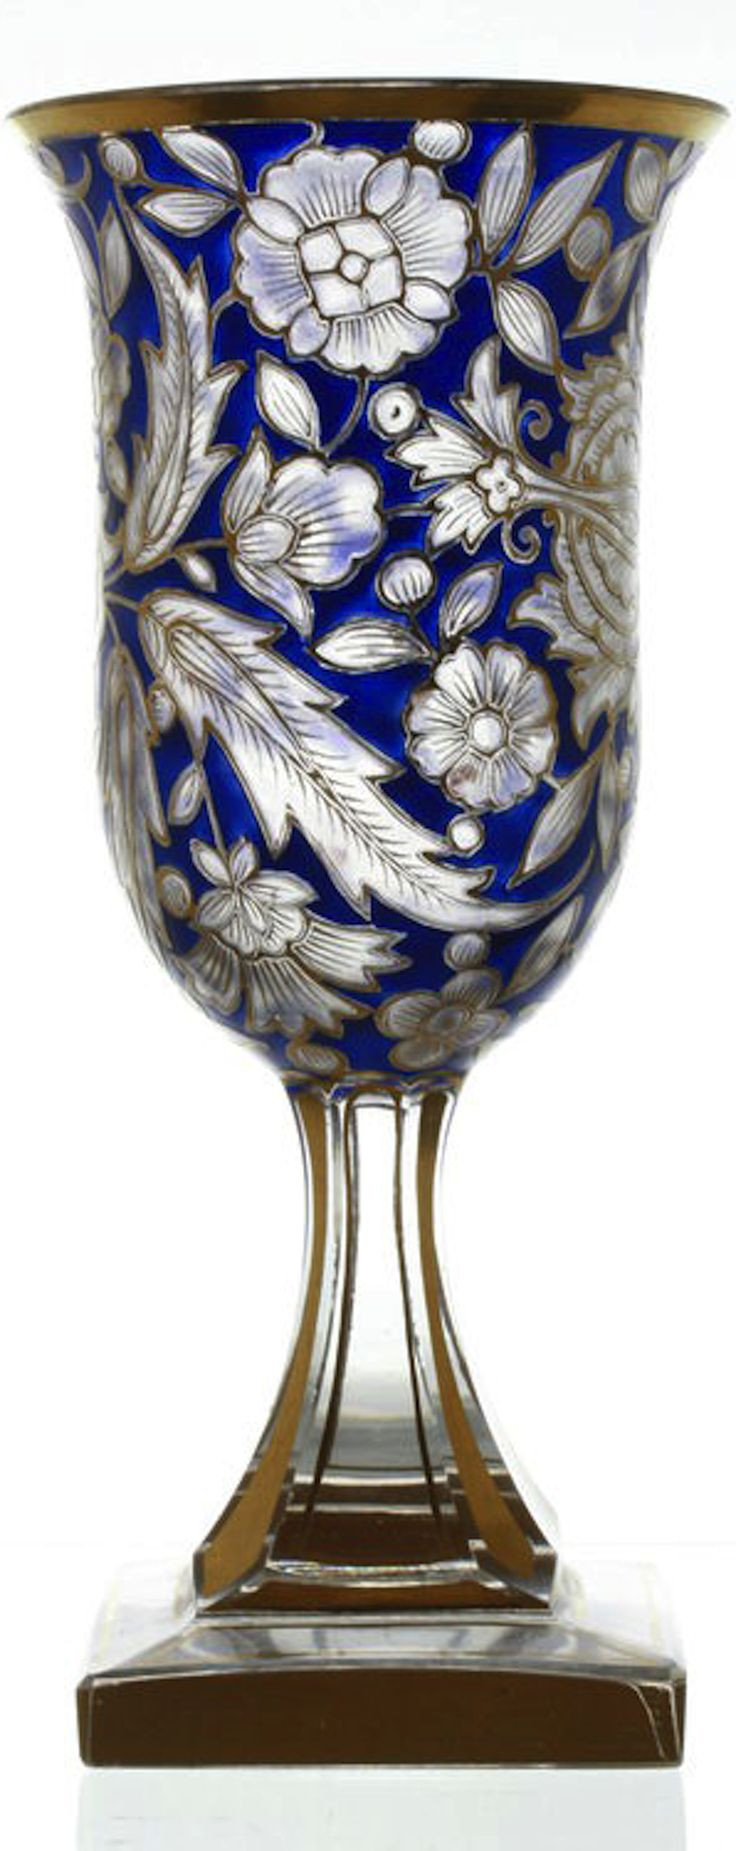 25 Awesome Waterford Marquis Sweet Memories Vase 2024 free download waterford marquis sweet memories vase of 25 best glassworks images on pinterest crystals antique glass and within antique art nouveau bohemian cut to clear decorative crystal glass goblet